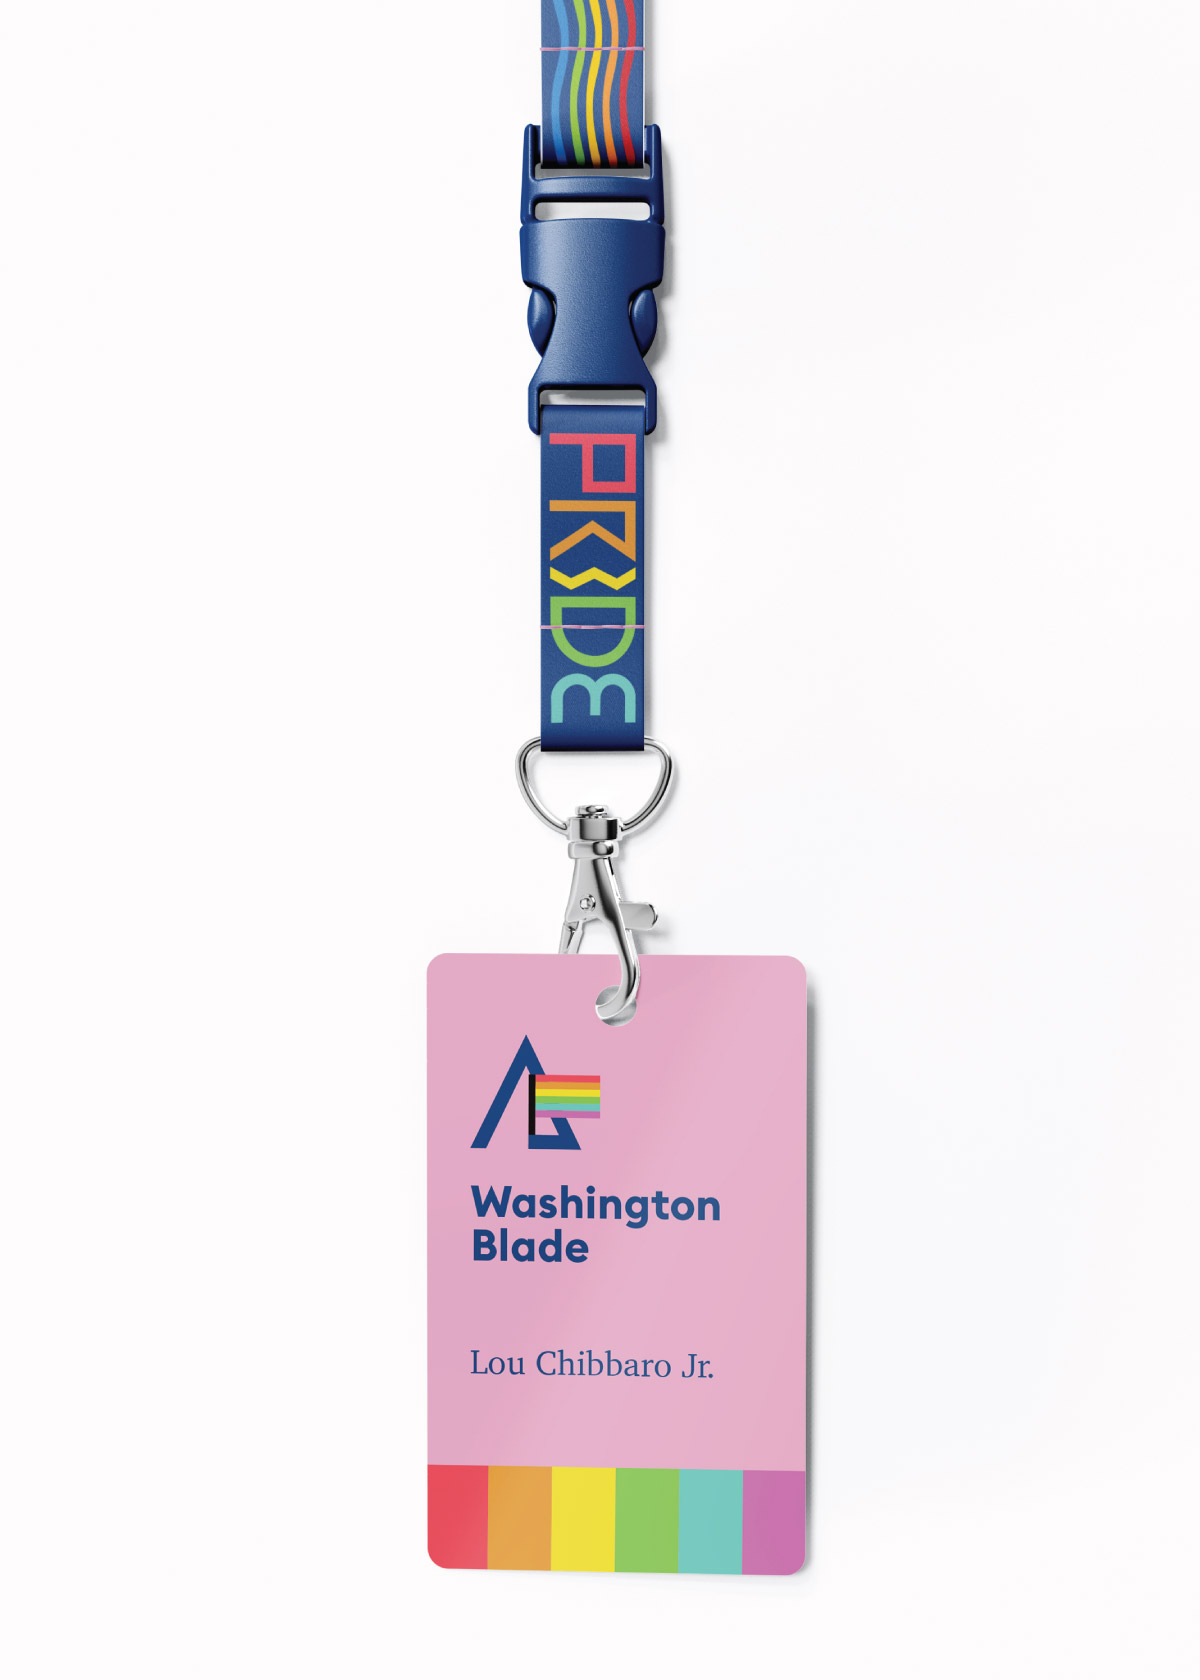 A mockup of what a pressbadge might look like. It features a navy blue lanyard with rainbow text and a wavy pattern, and a bright pink card is attached with the name of the news organization and reporter on it. A rainbow stripe sits on the bottom of the card.